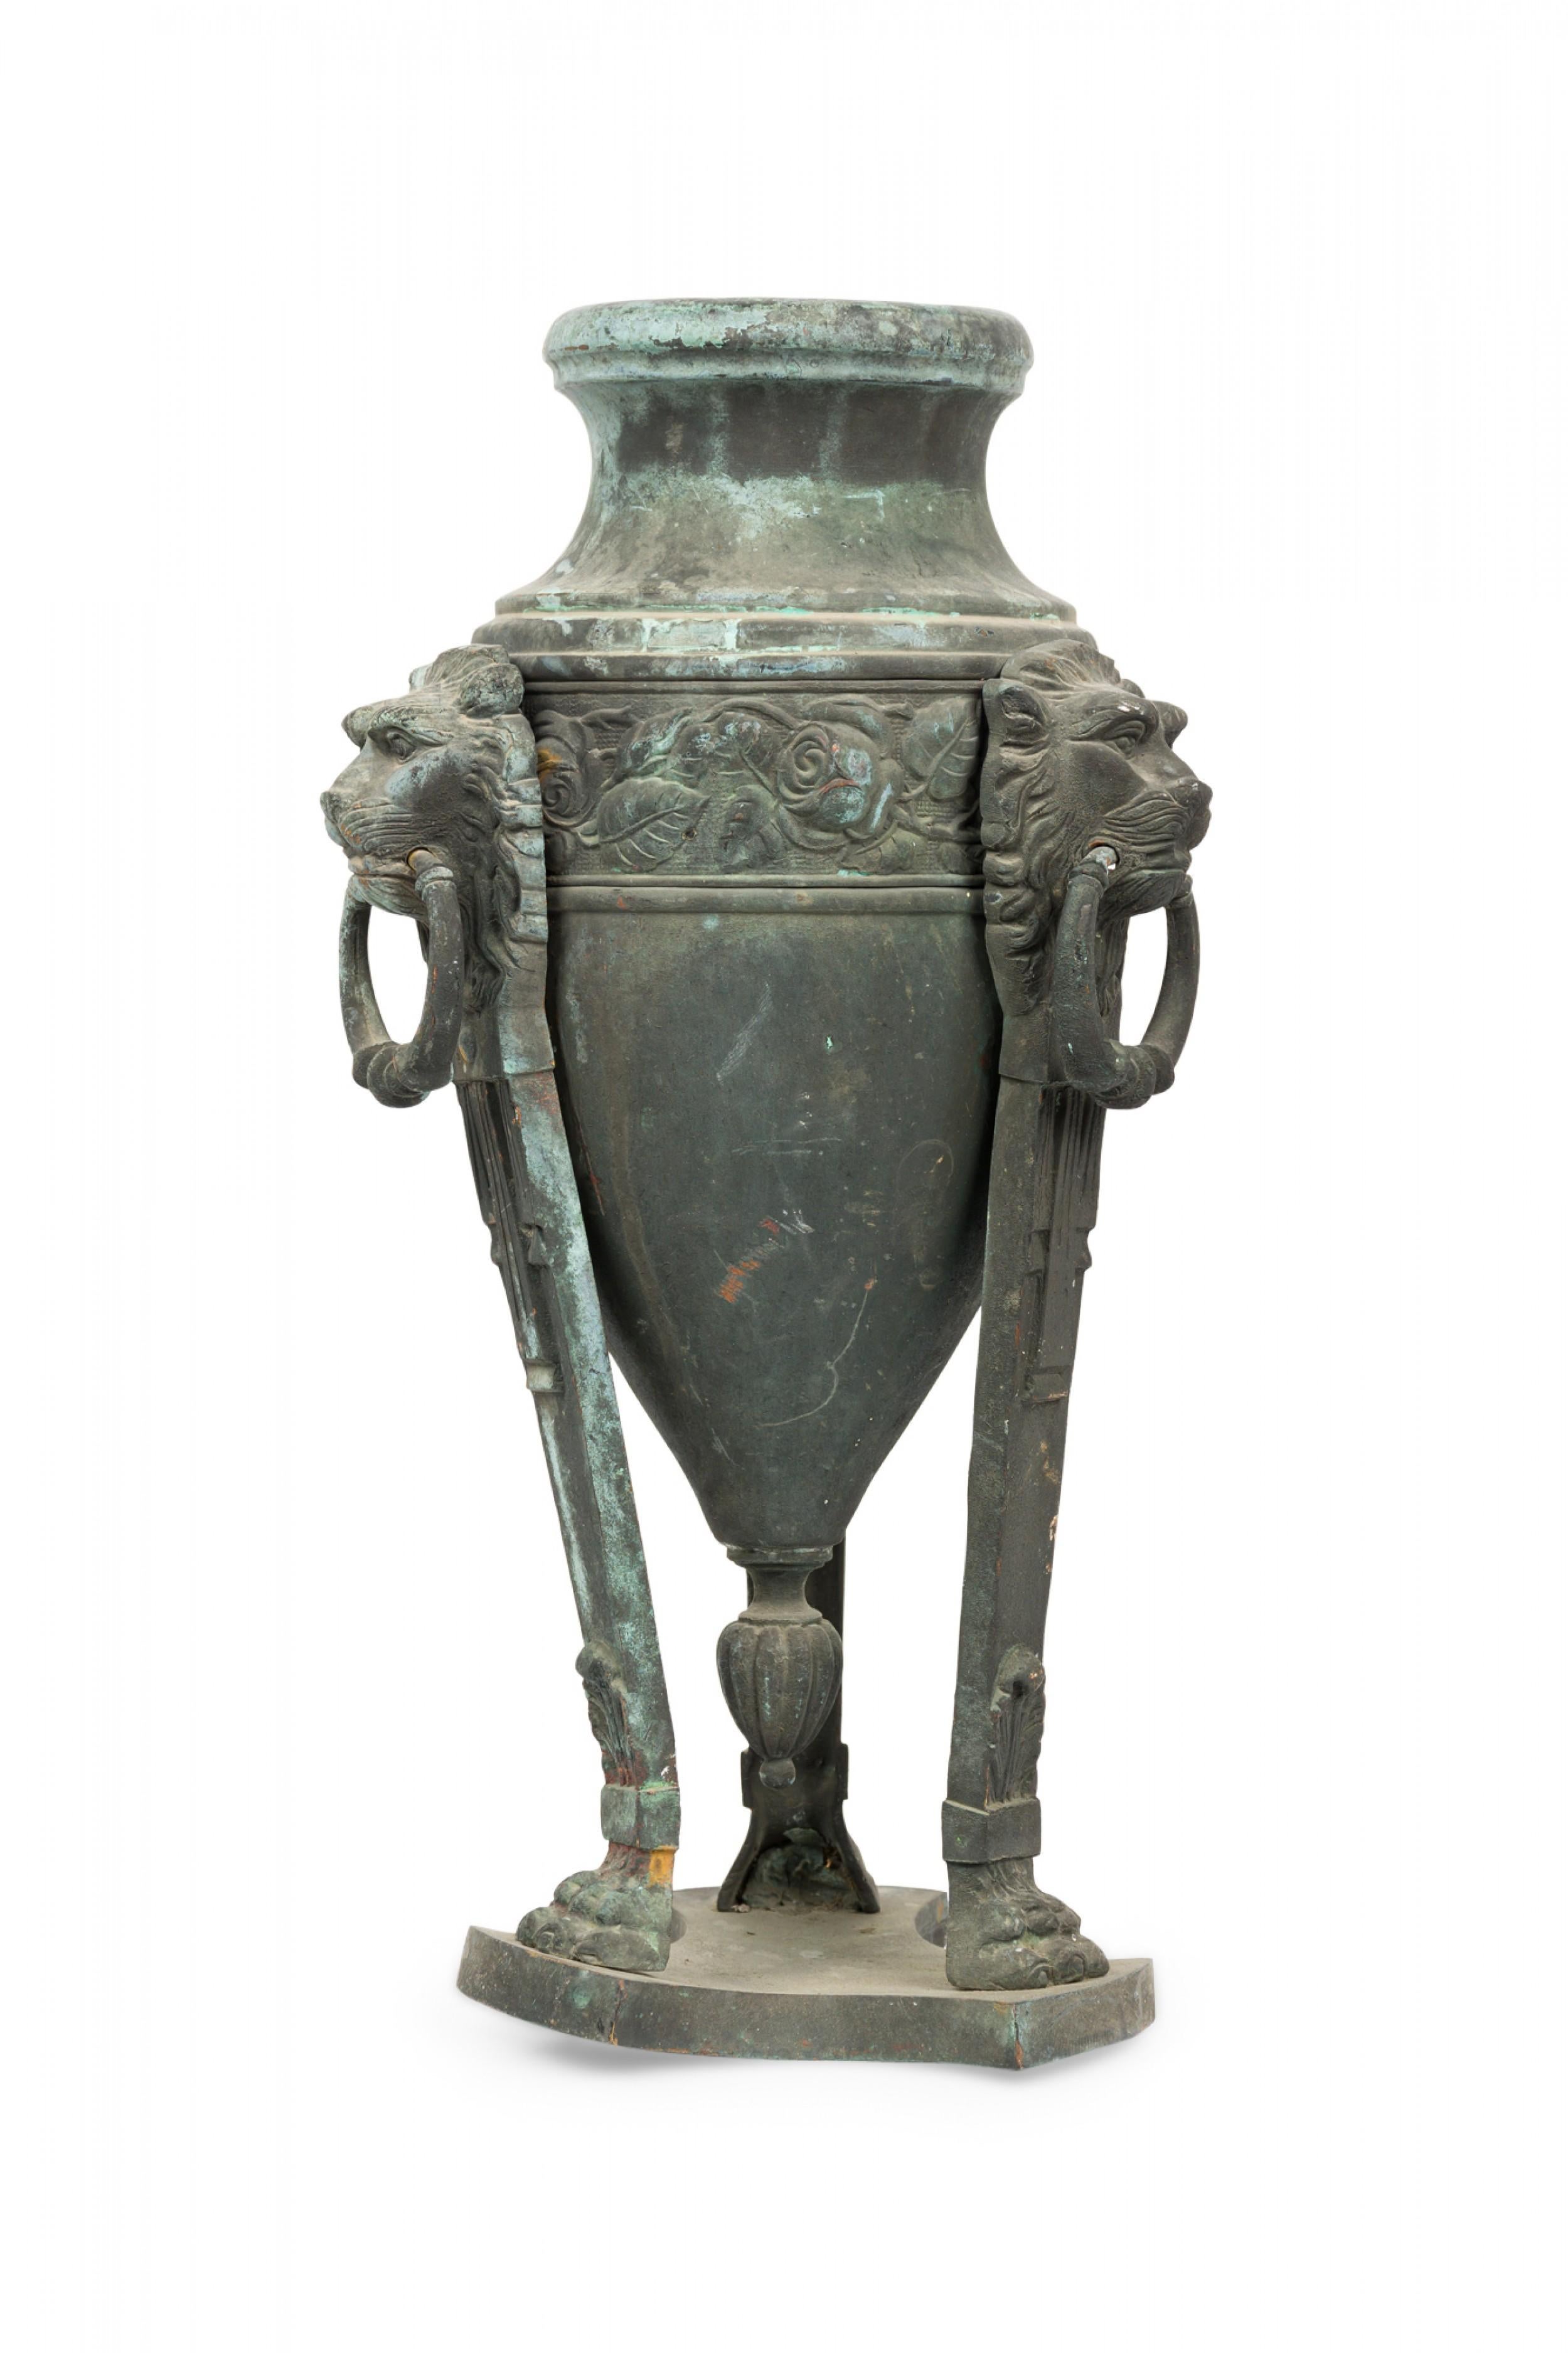 PAIR of Italian neoclassic (19th century) bronze Athenian form urns with natural patina, featuring lions\' head embellishments with ring handles, resting on three lions feet joined by a triangular base (PRICED AS PAIR).